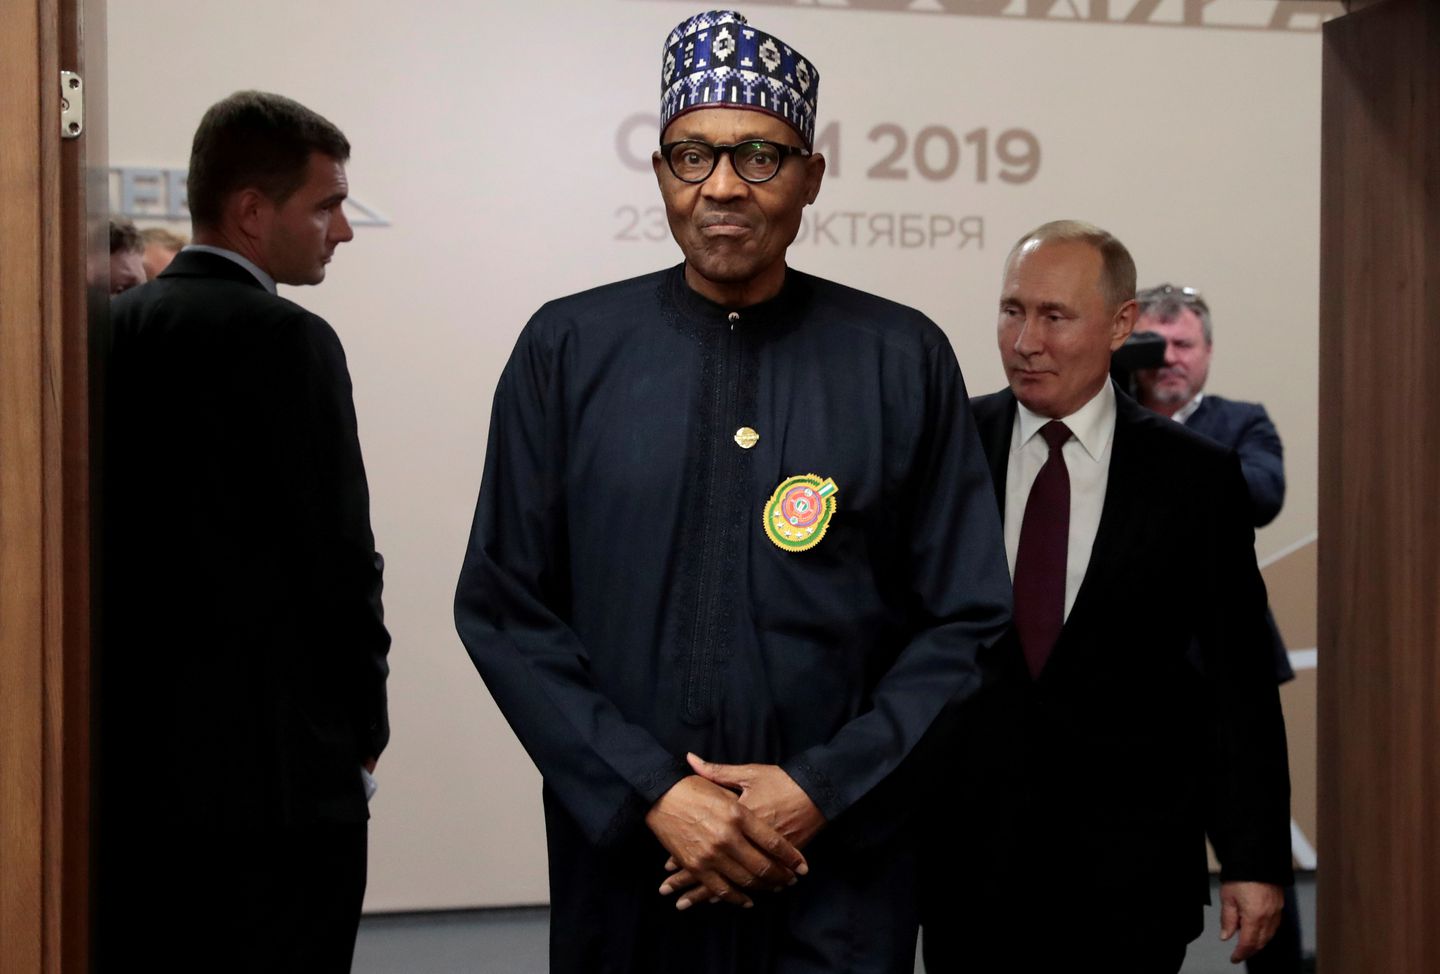 With the arrest of a prominent journalist, Nigeria’s Buhari is up to his old tricks – Washington Post